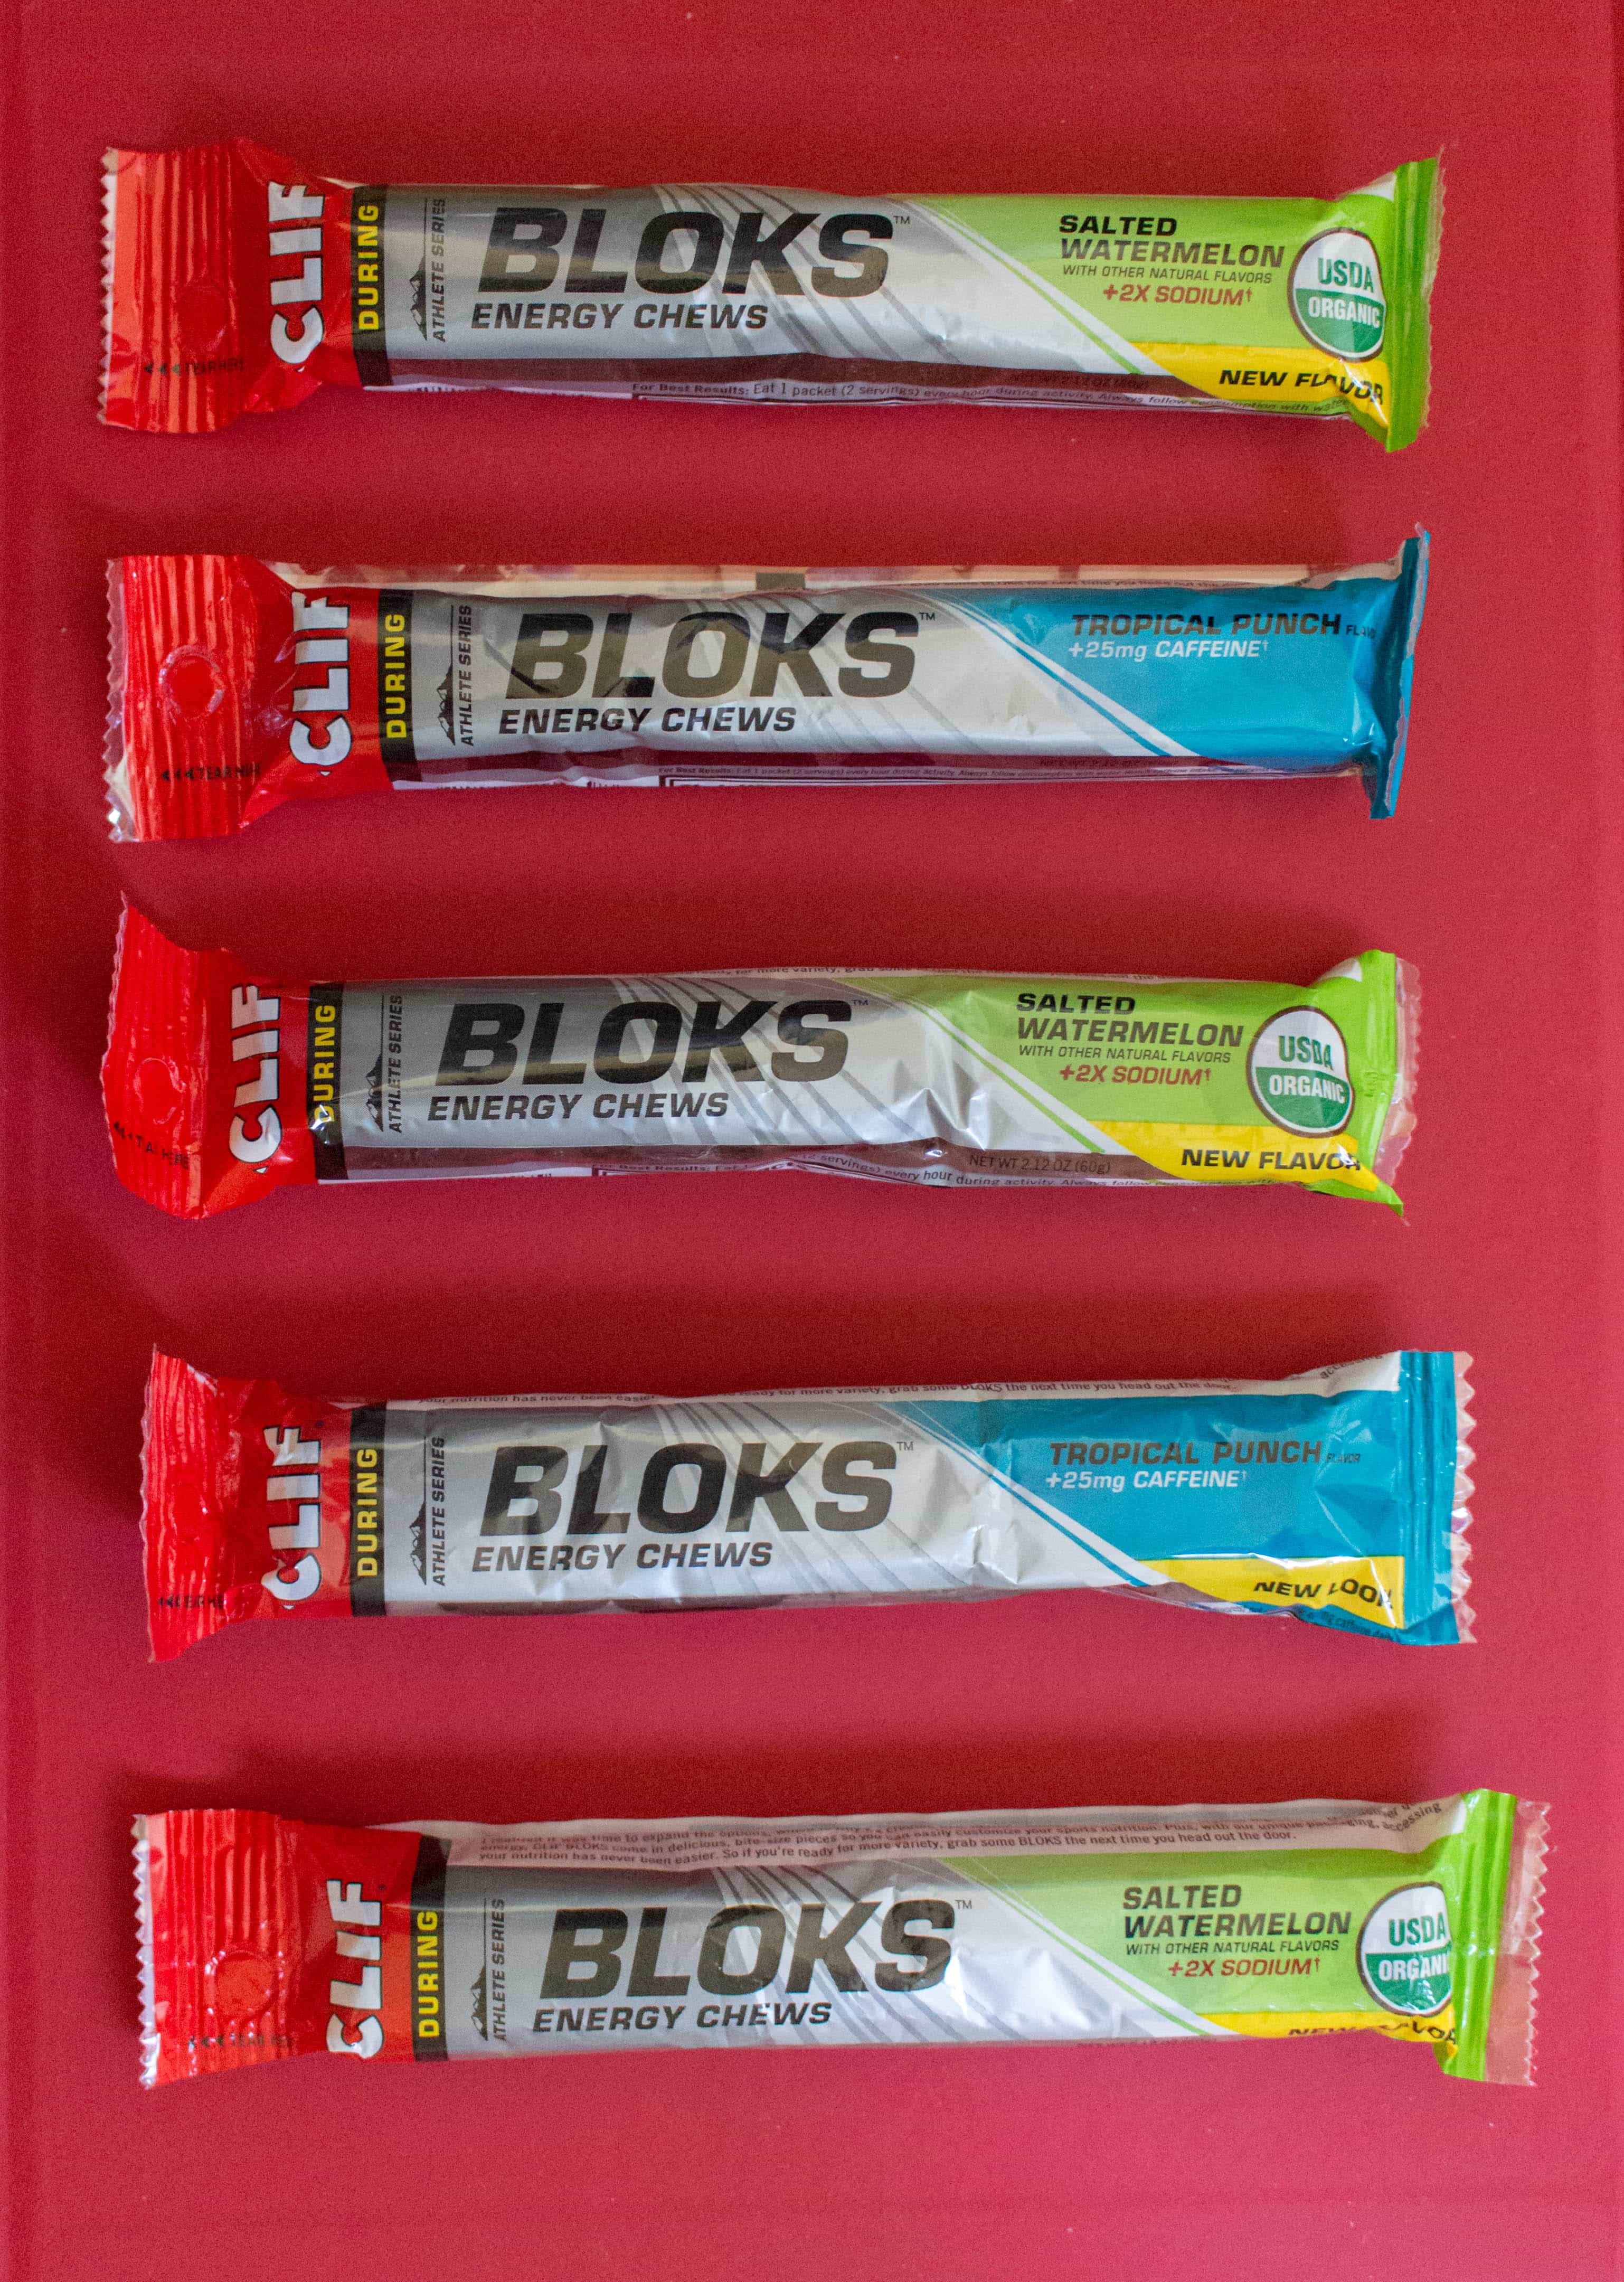 Try It Tuesday: CLIF Bar x SoulCycle